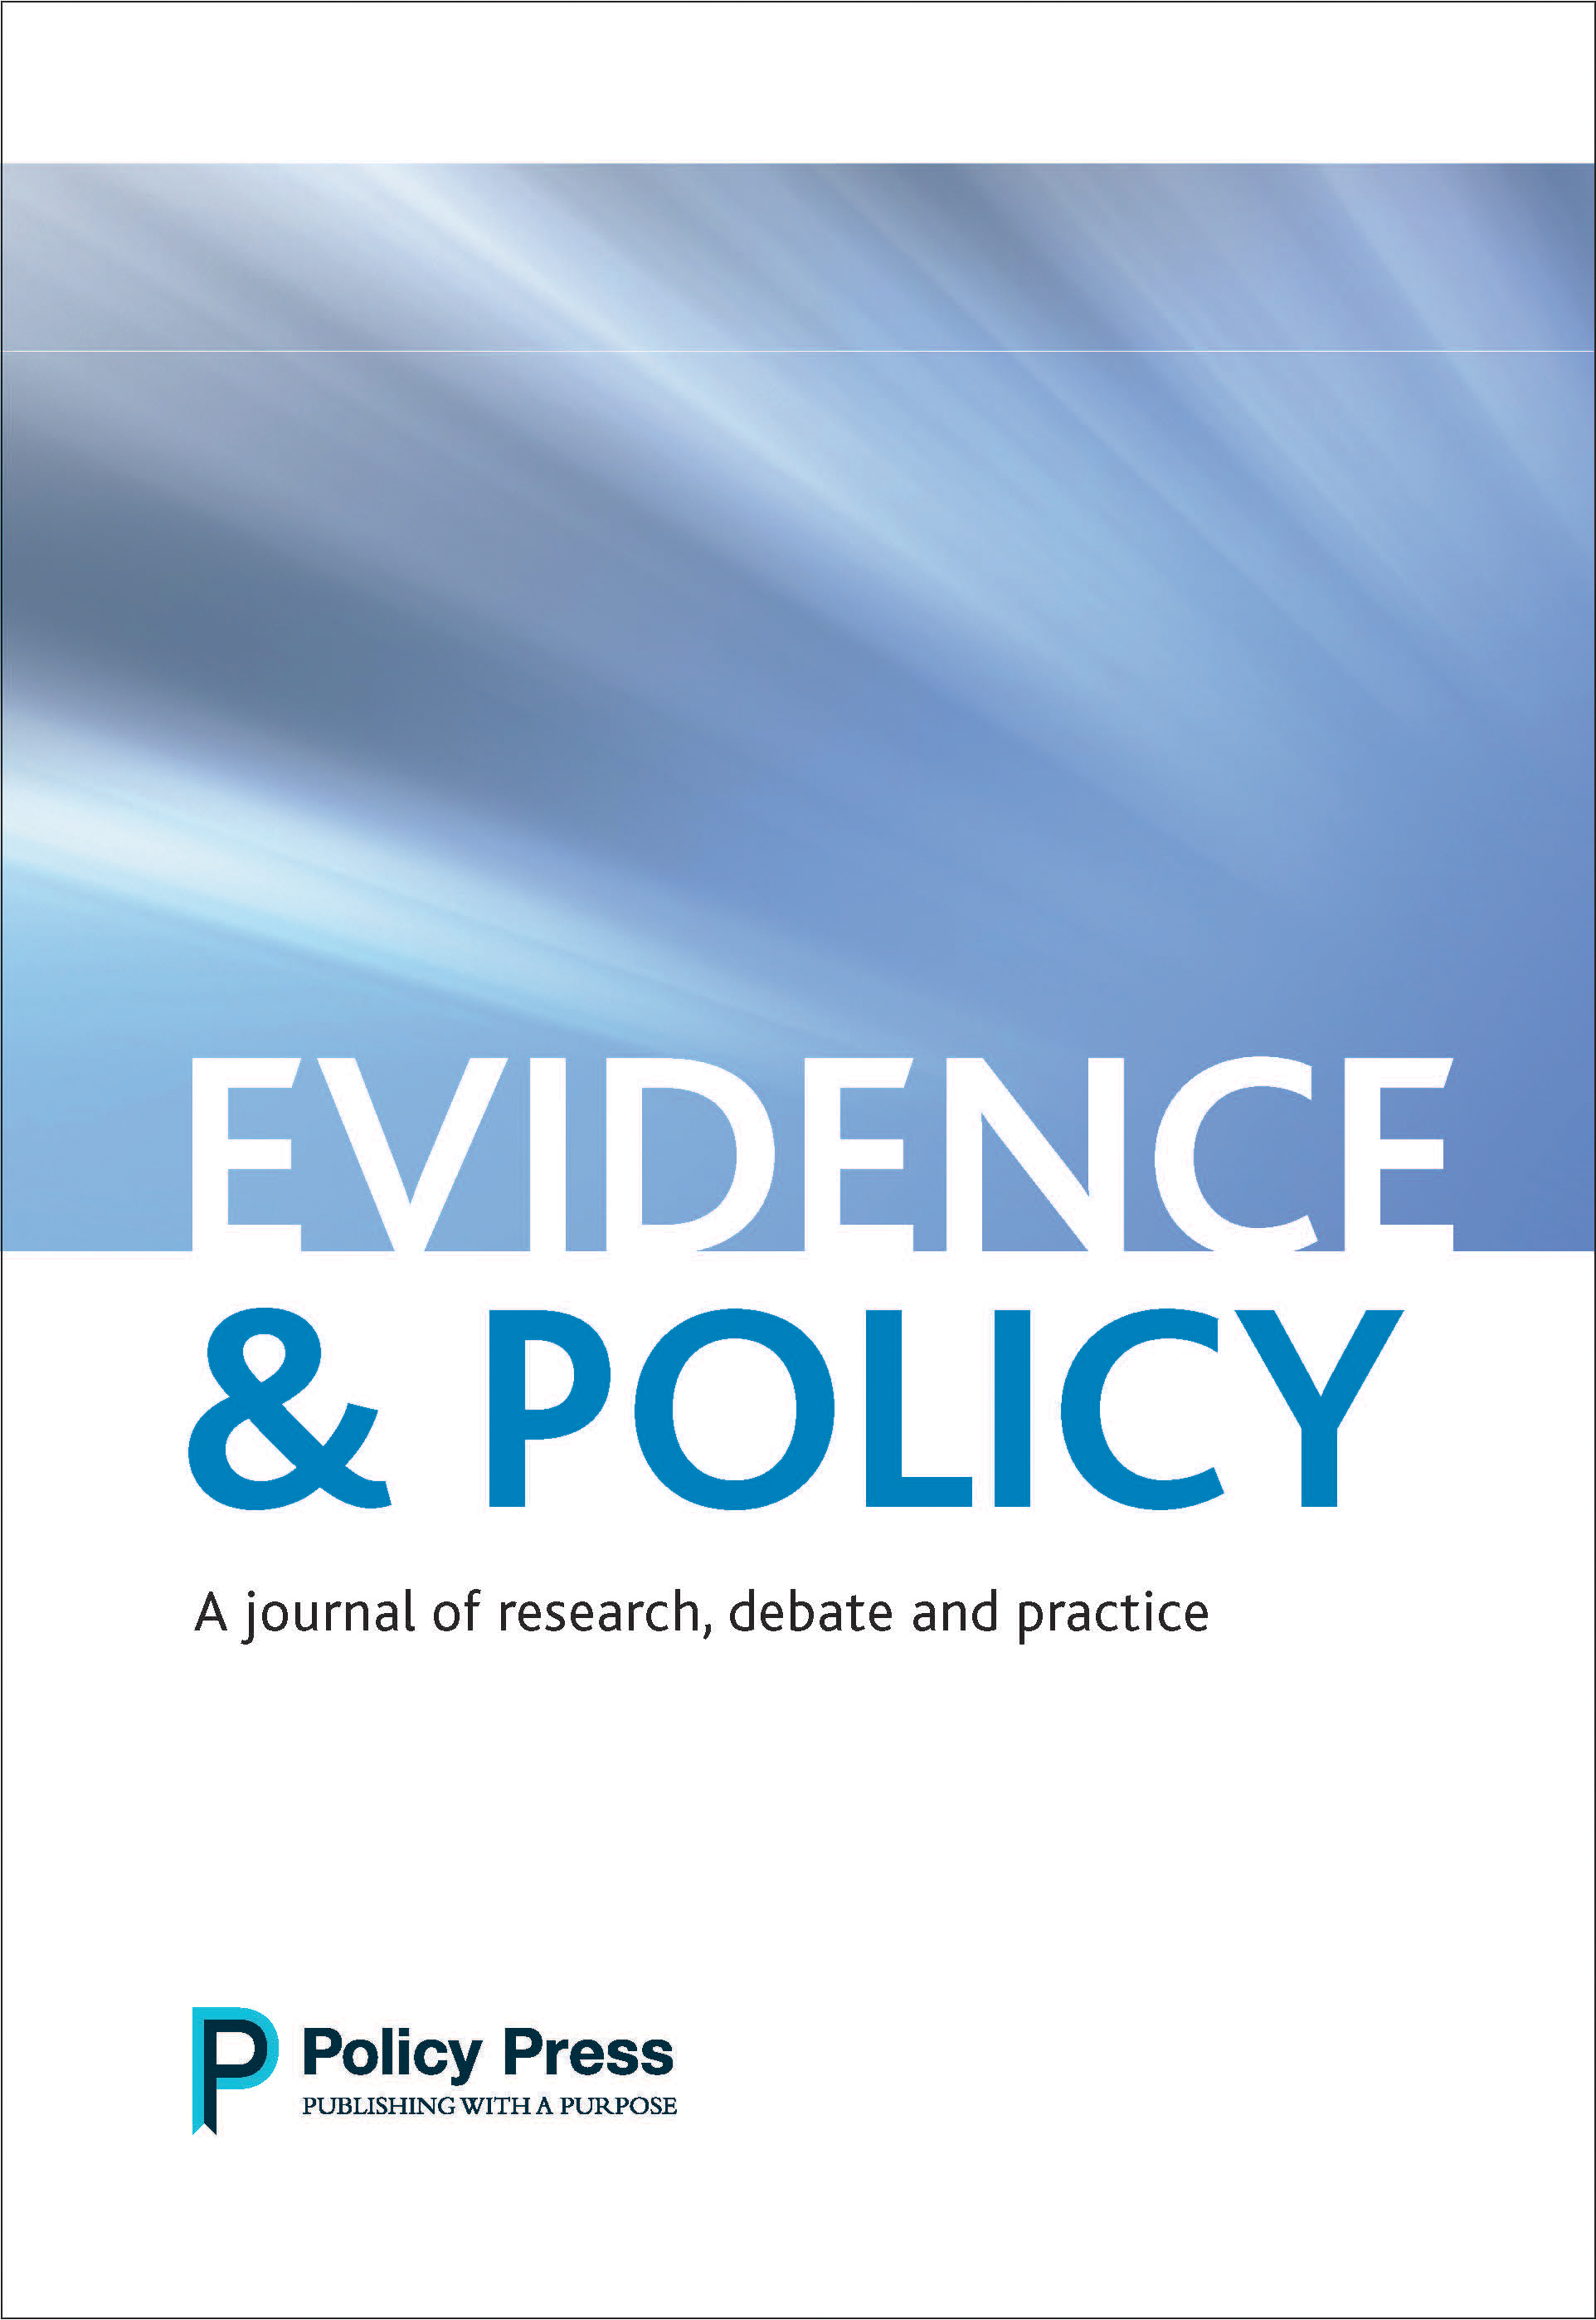 All Evidence & Policy content is free to access until 30 September 2016